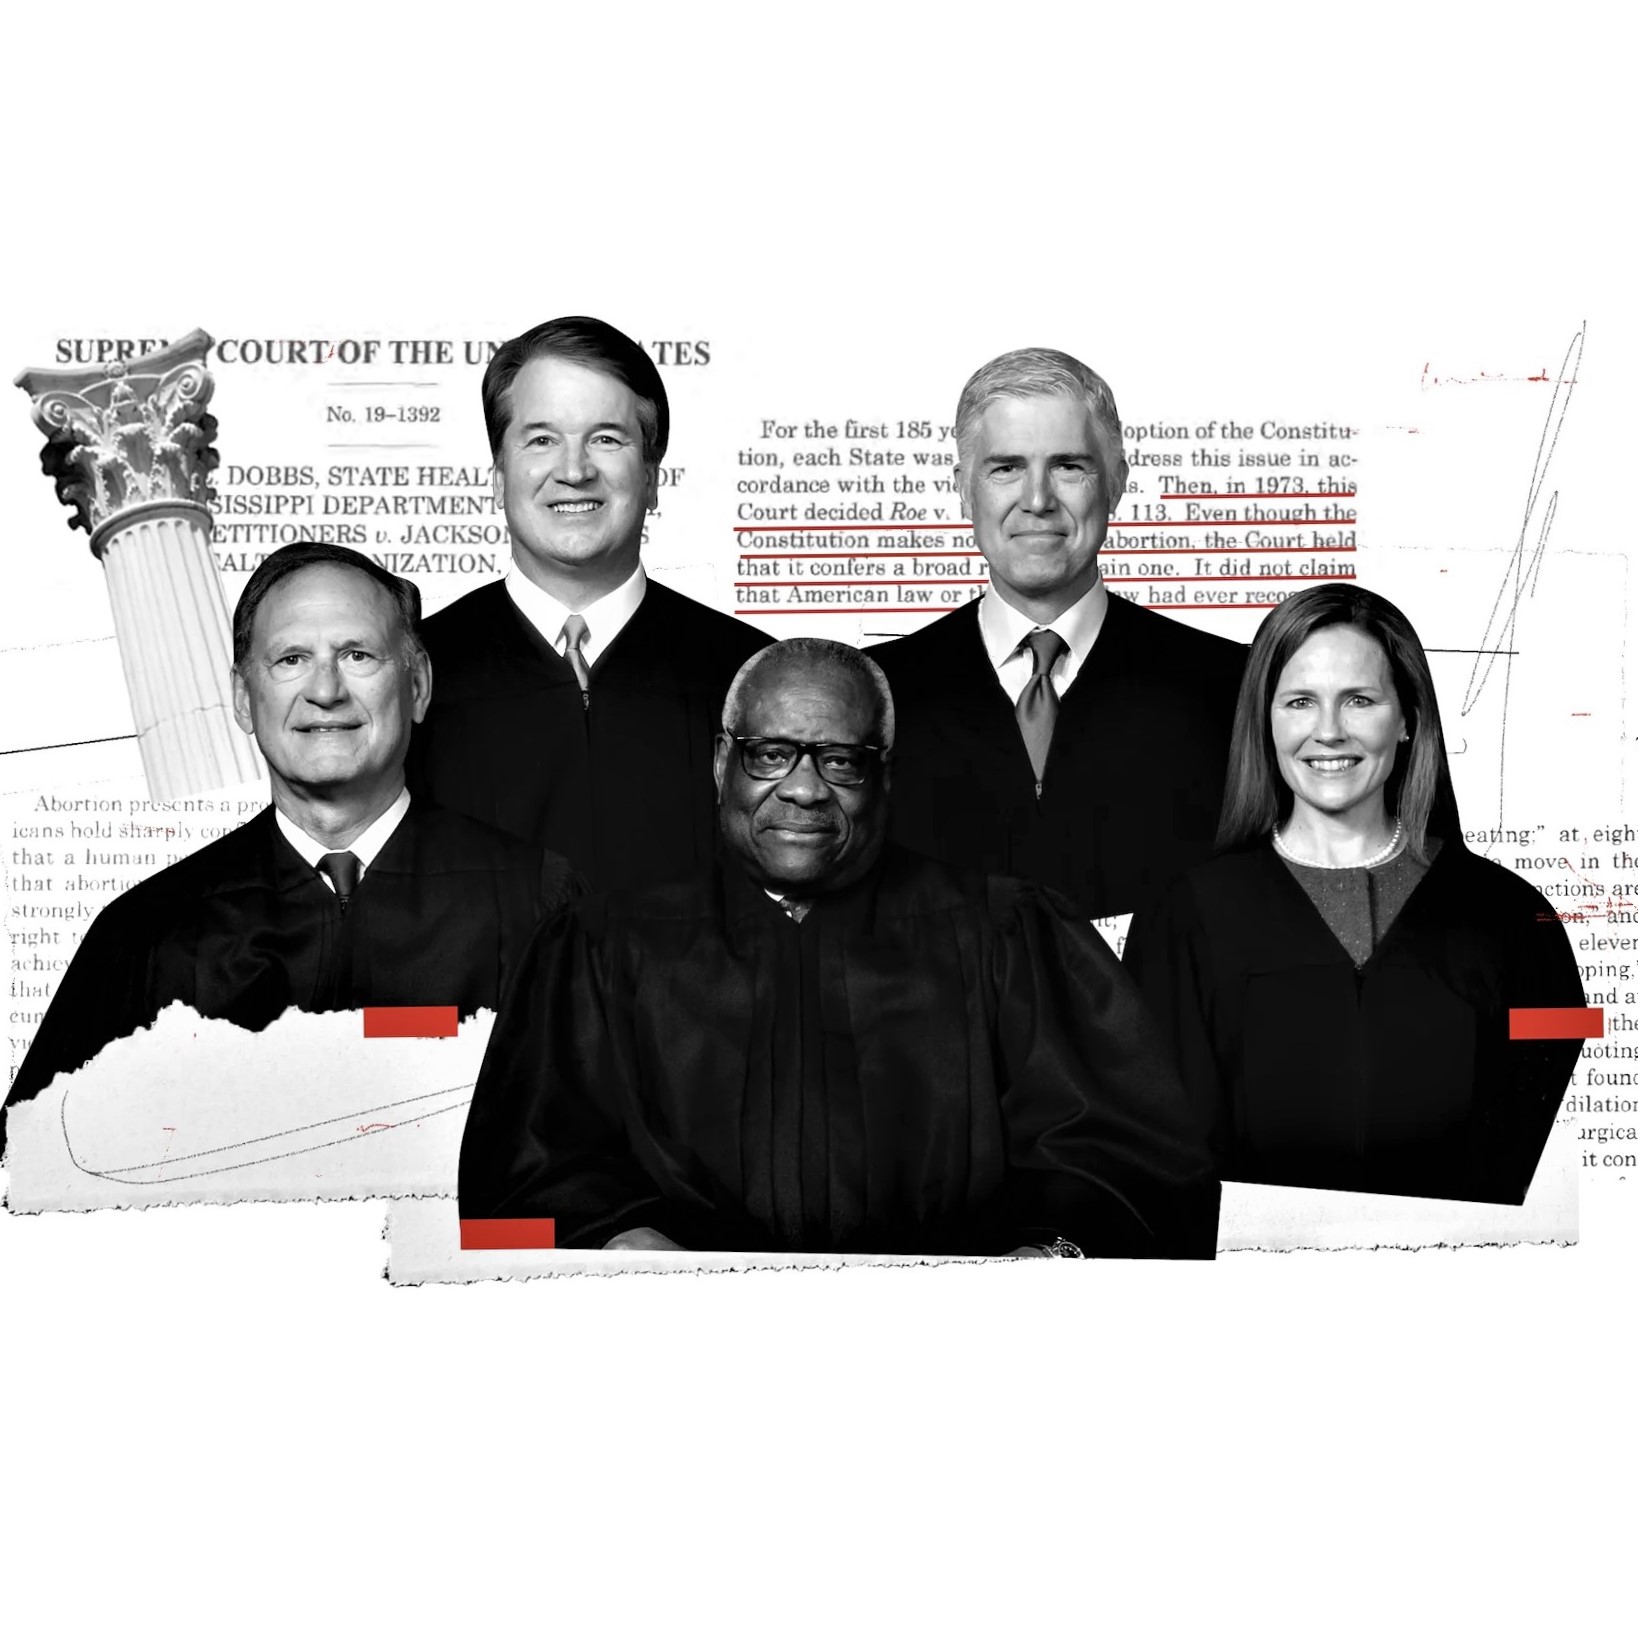 SCOTUS set to overturn Roe-v.-Wade: The five justices in favor of overturning